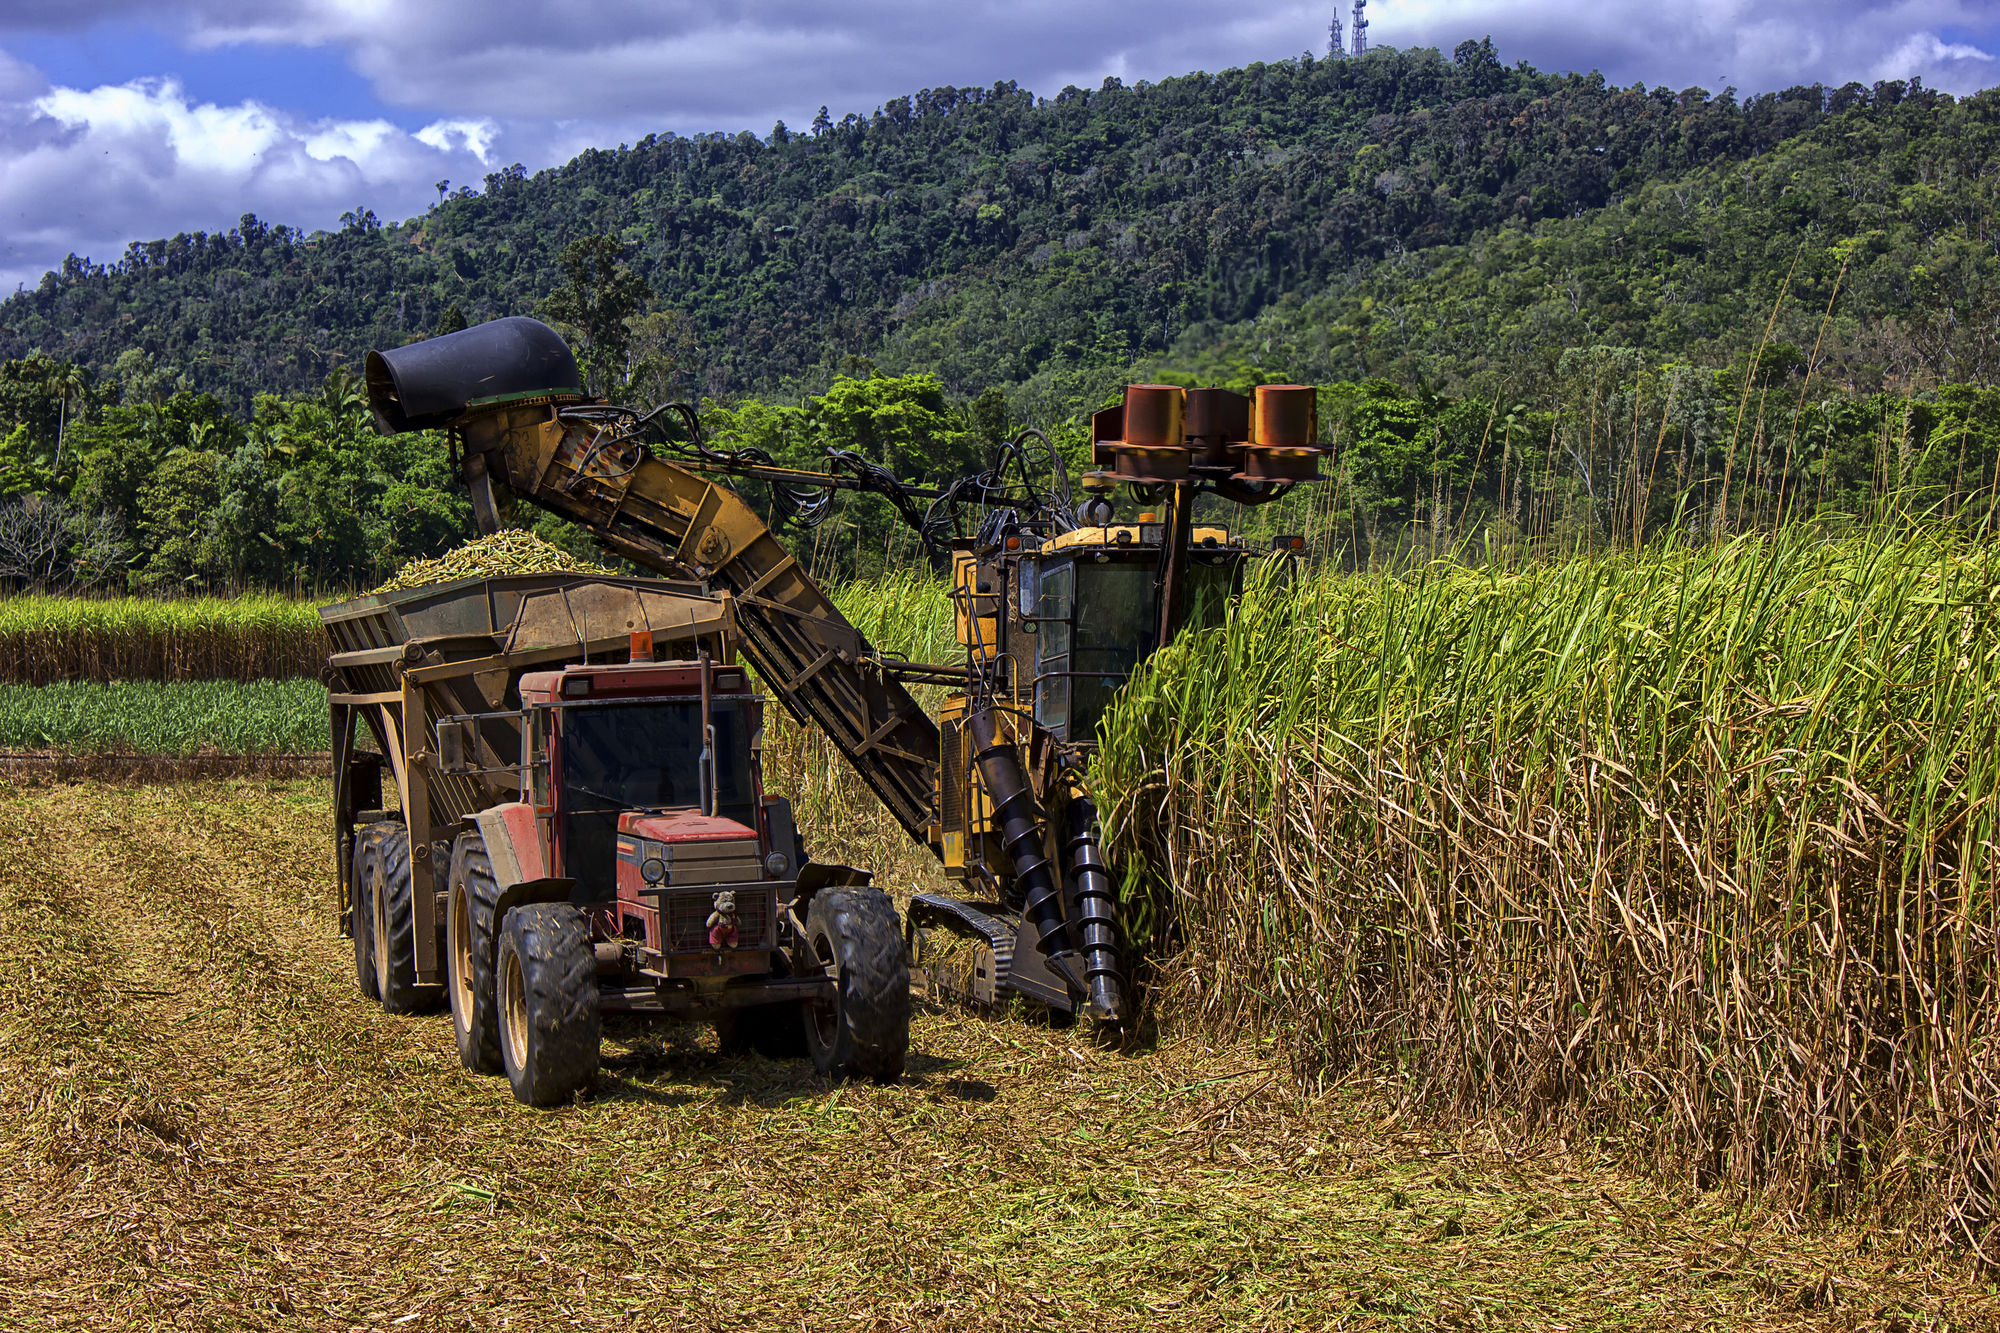 Response to Cairns News story on Cane Growers